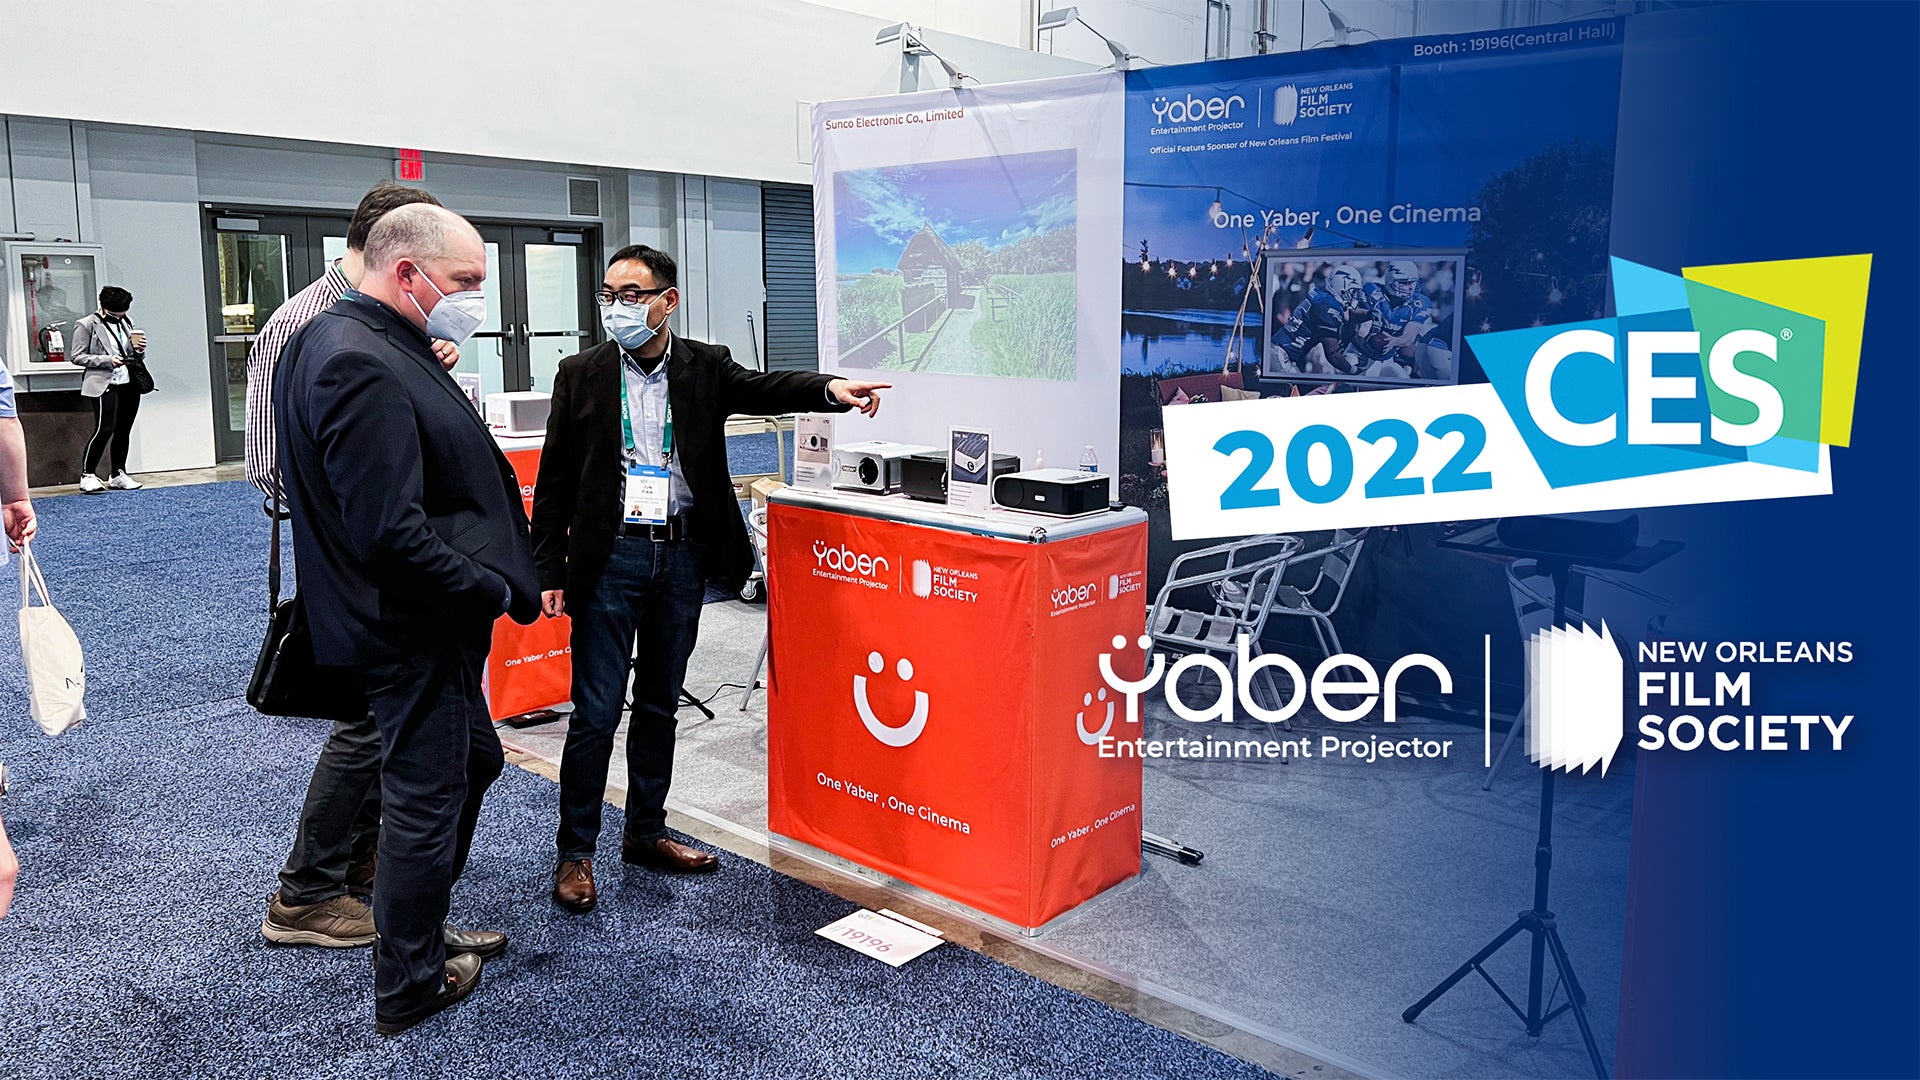 Yaber entertainment projector met friends at CES 2022!